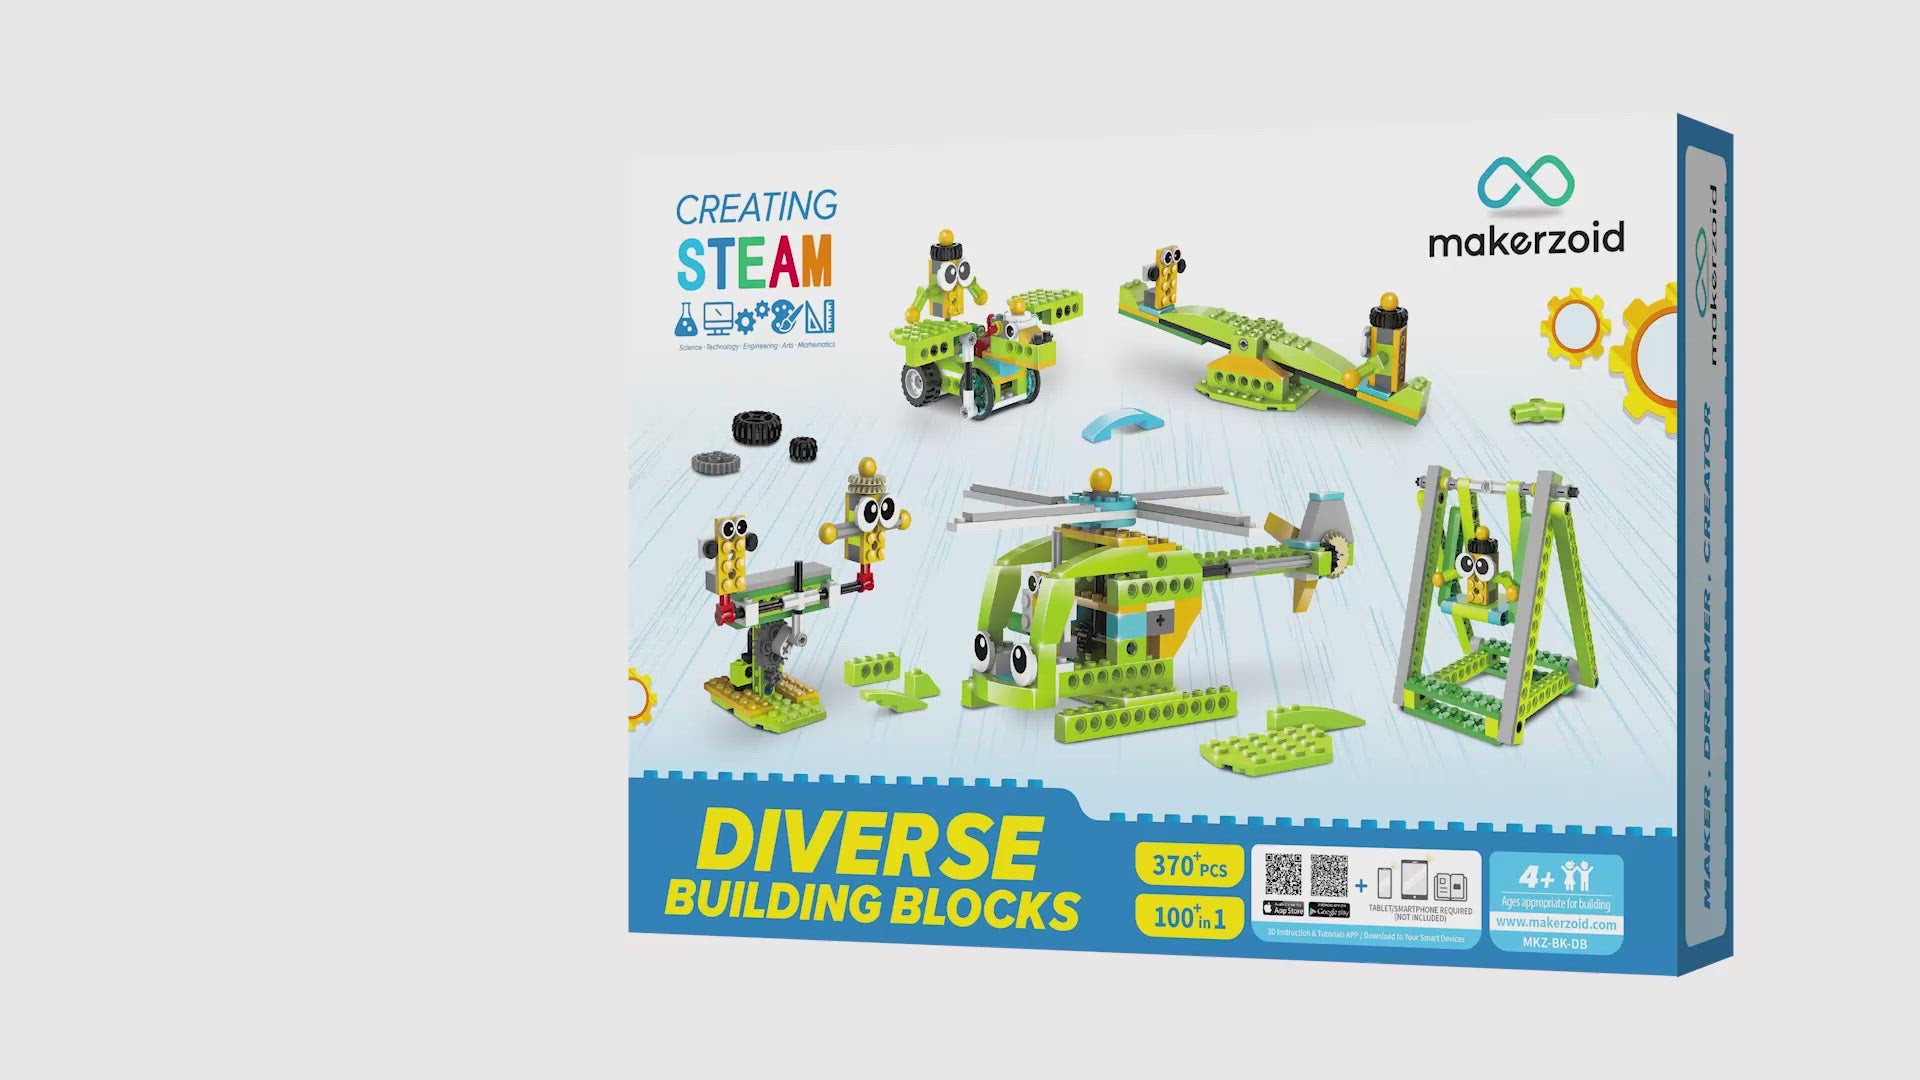 Makerzoid STEAM Building Blocks 100 in 1 Building Set, Educational Toys for Boys and Girls, Gift for Kids 6+ Yeas Old